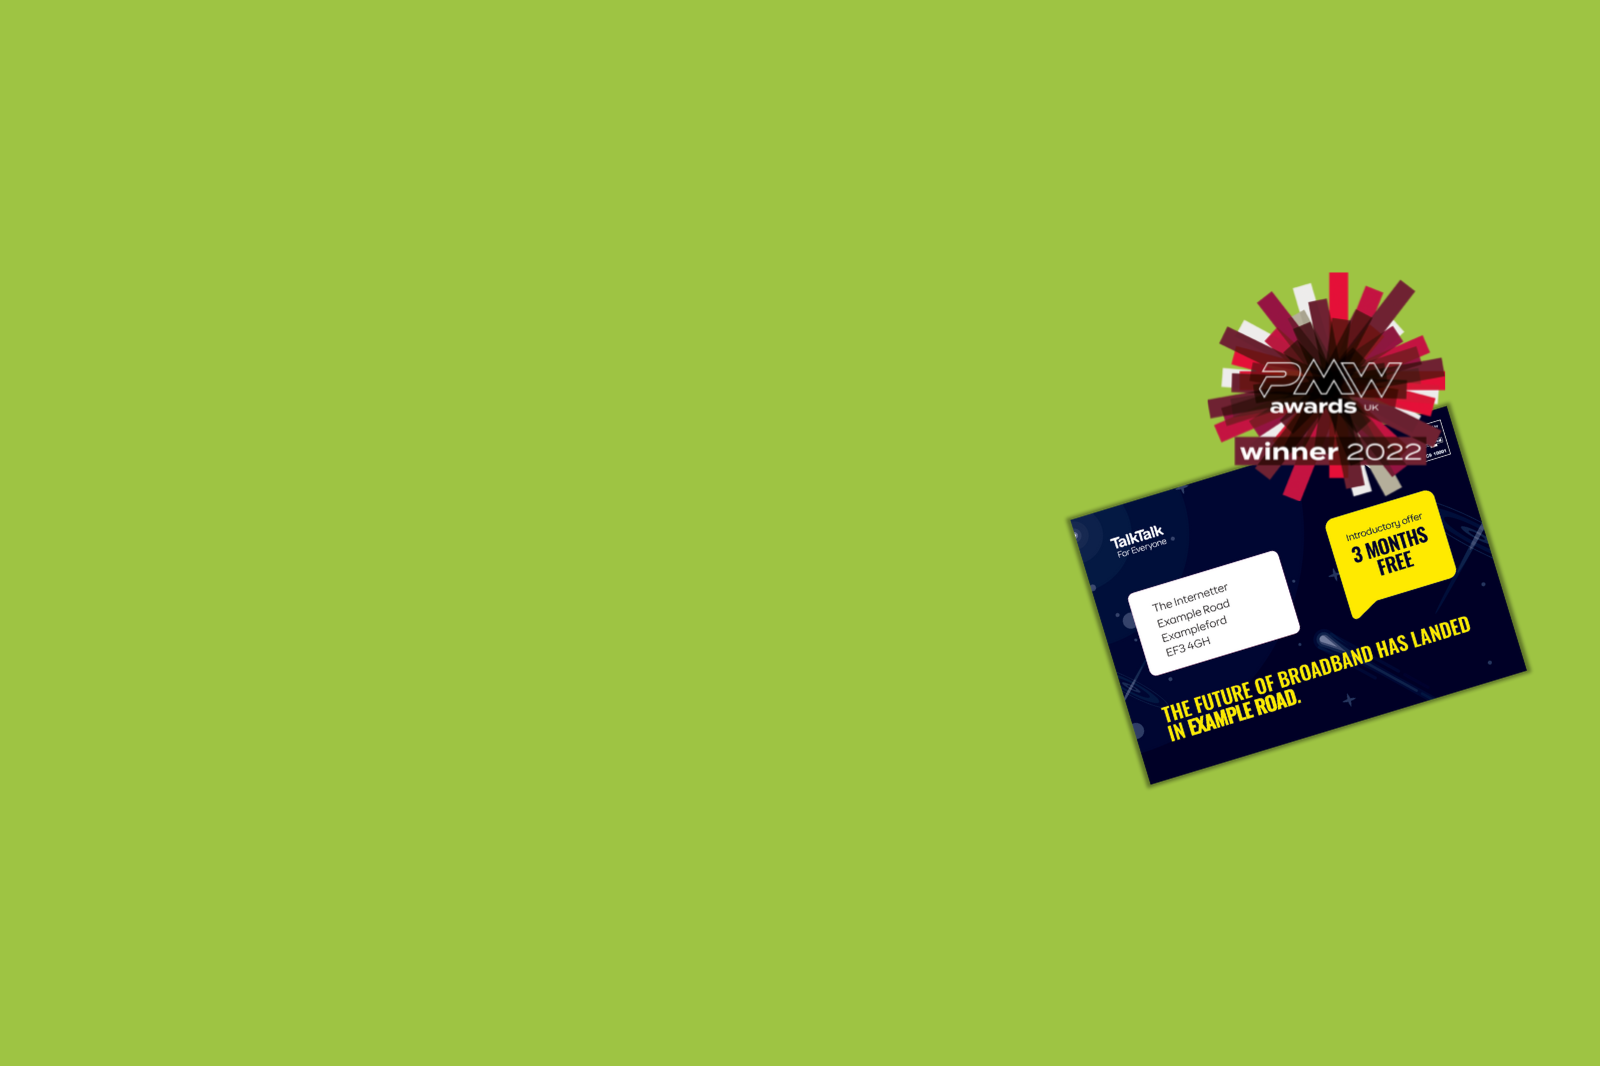 A business card for TalkTalk's Laser Focused Mail Campaign with a green background.